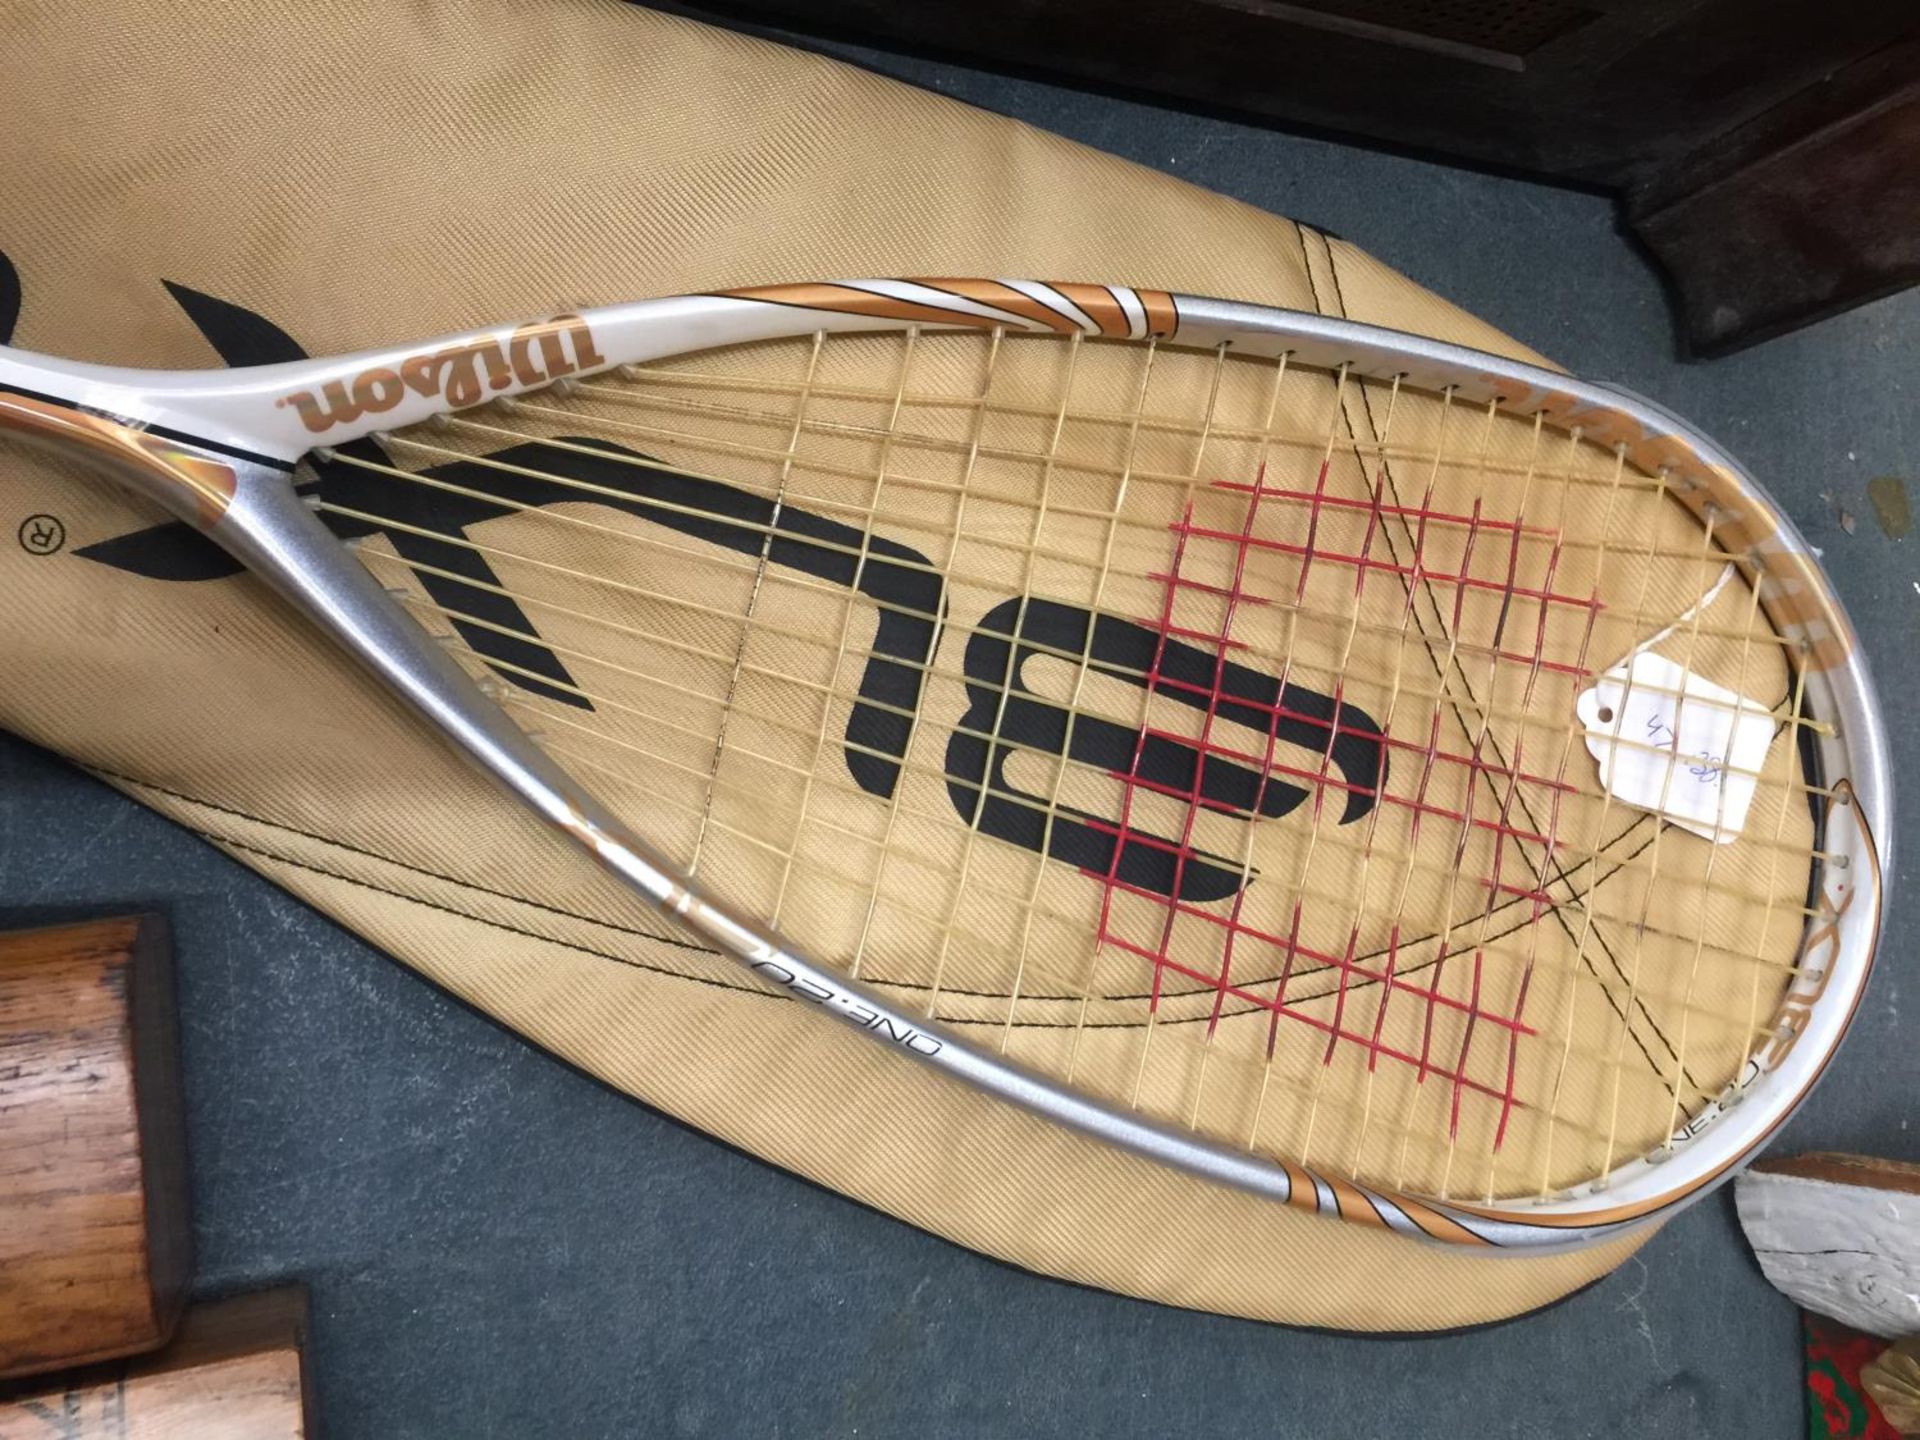 A WILSON HYBRID RACKET WITH COVER - Image 3 of 3